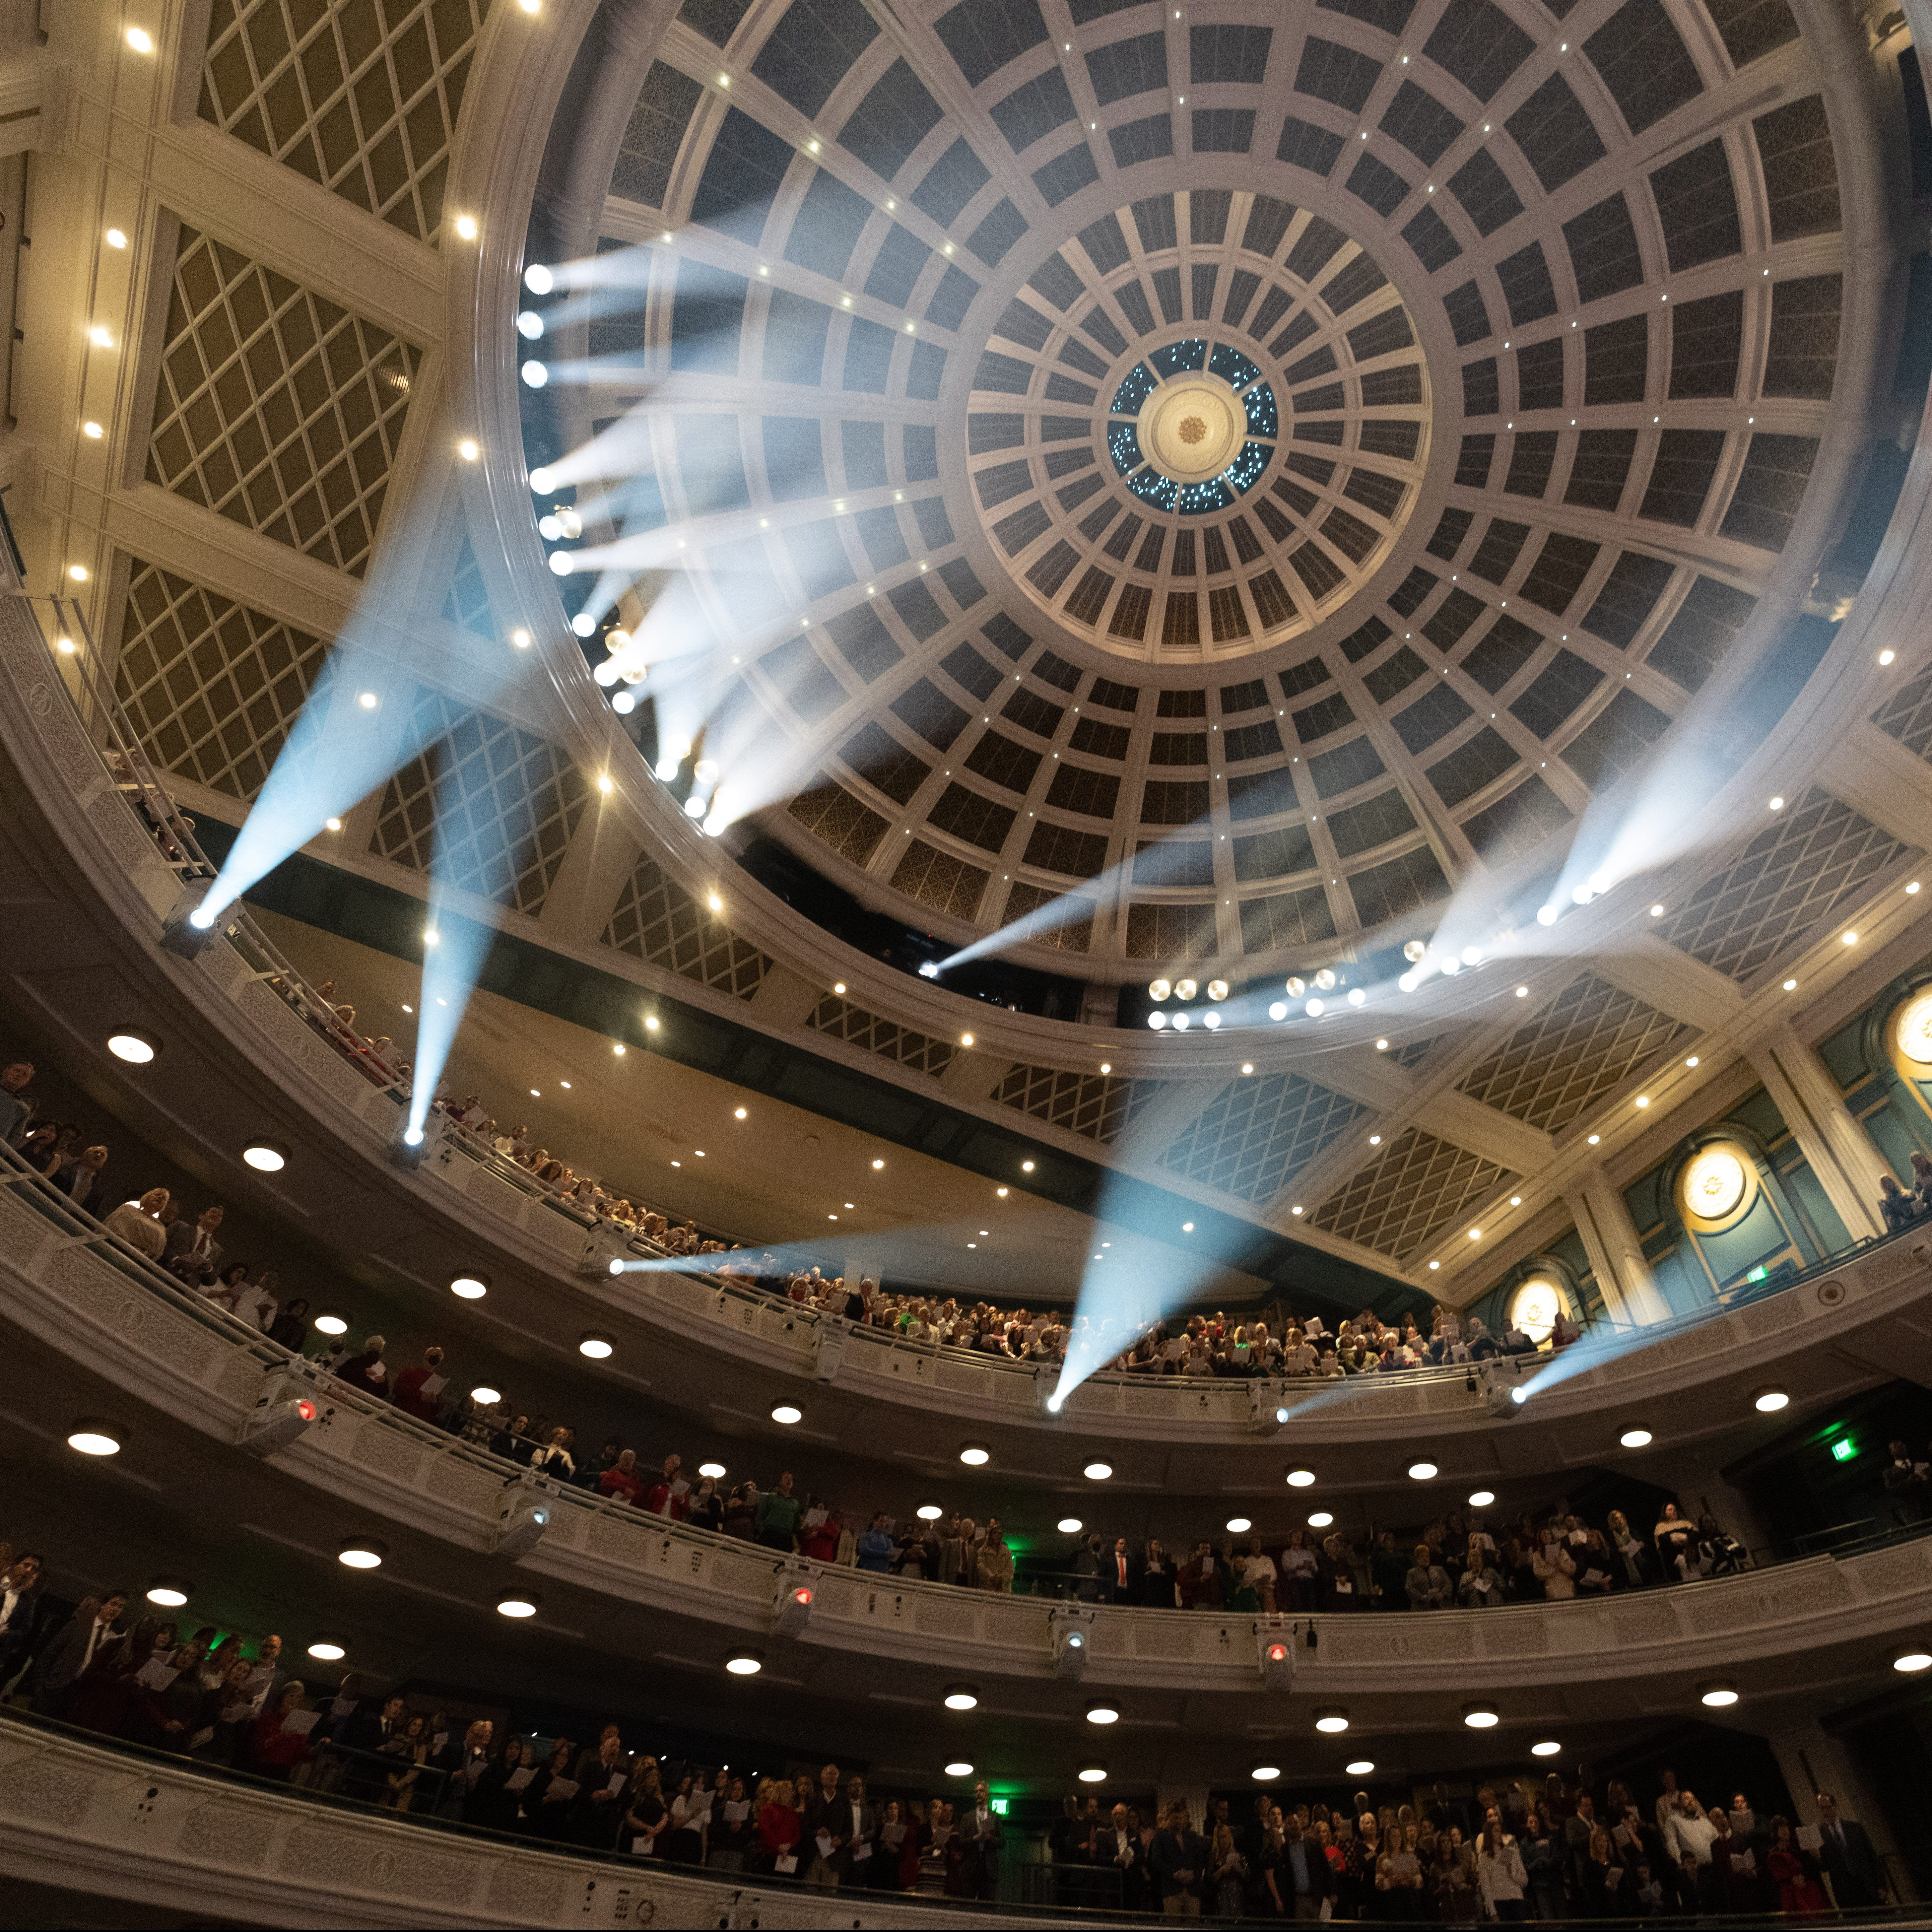 image of the upper levels of the performance hall filled with event attendees